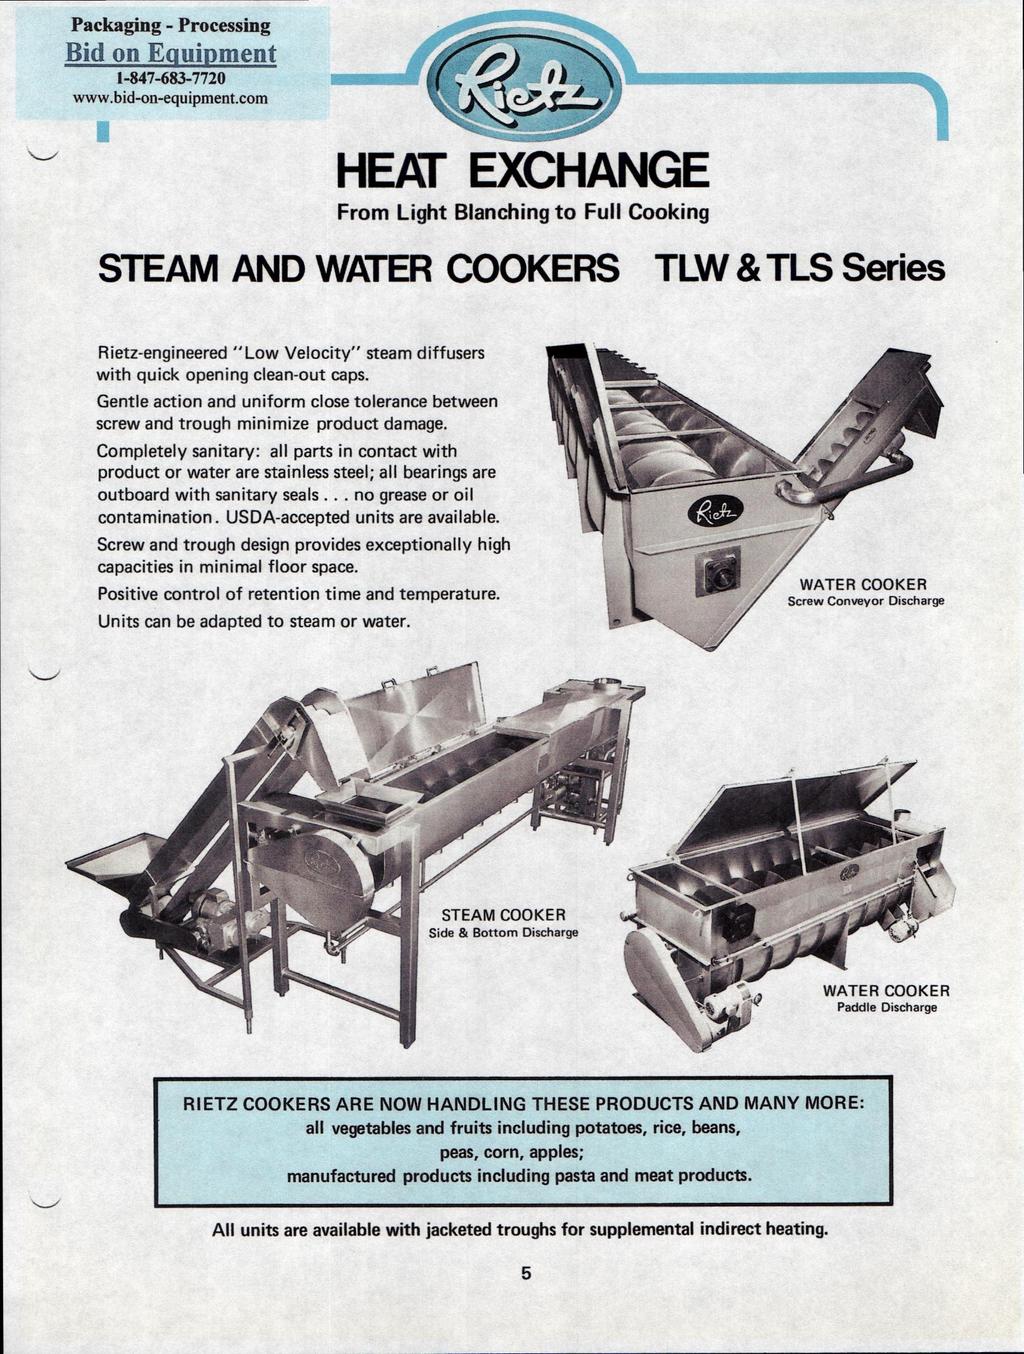 E HEAT EXCHANGE From Light Blanching to Full Cooking STEAM AND WATER COOKERS TLW & TLS Series Rietz-engineered "Low Velocity" steam diffusers with quick opening clean-out caps.